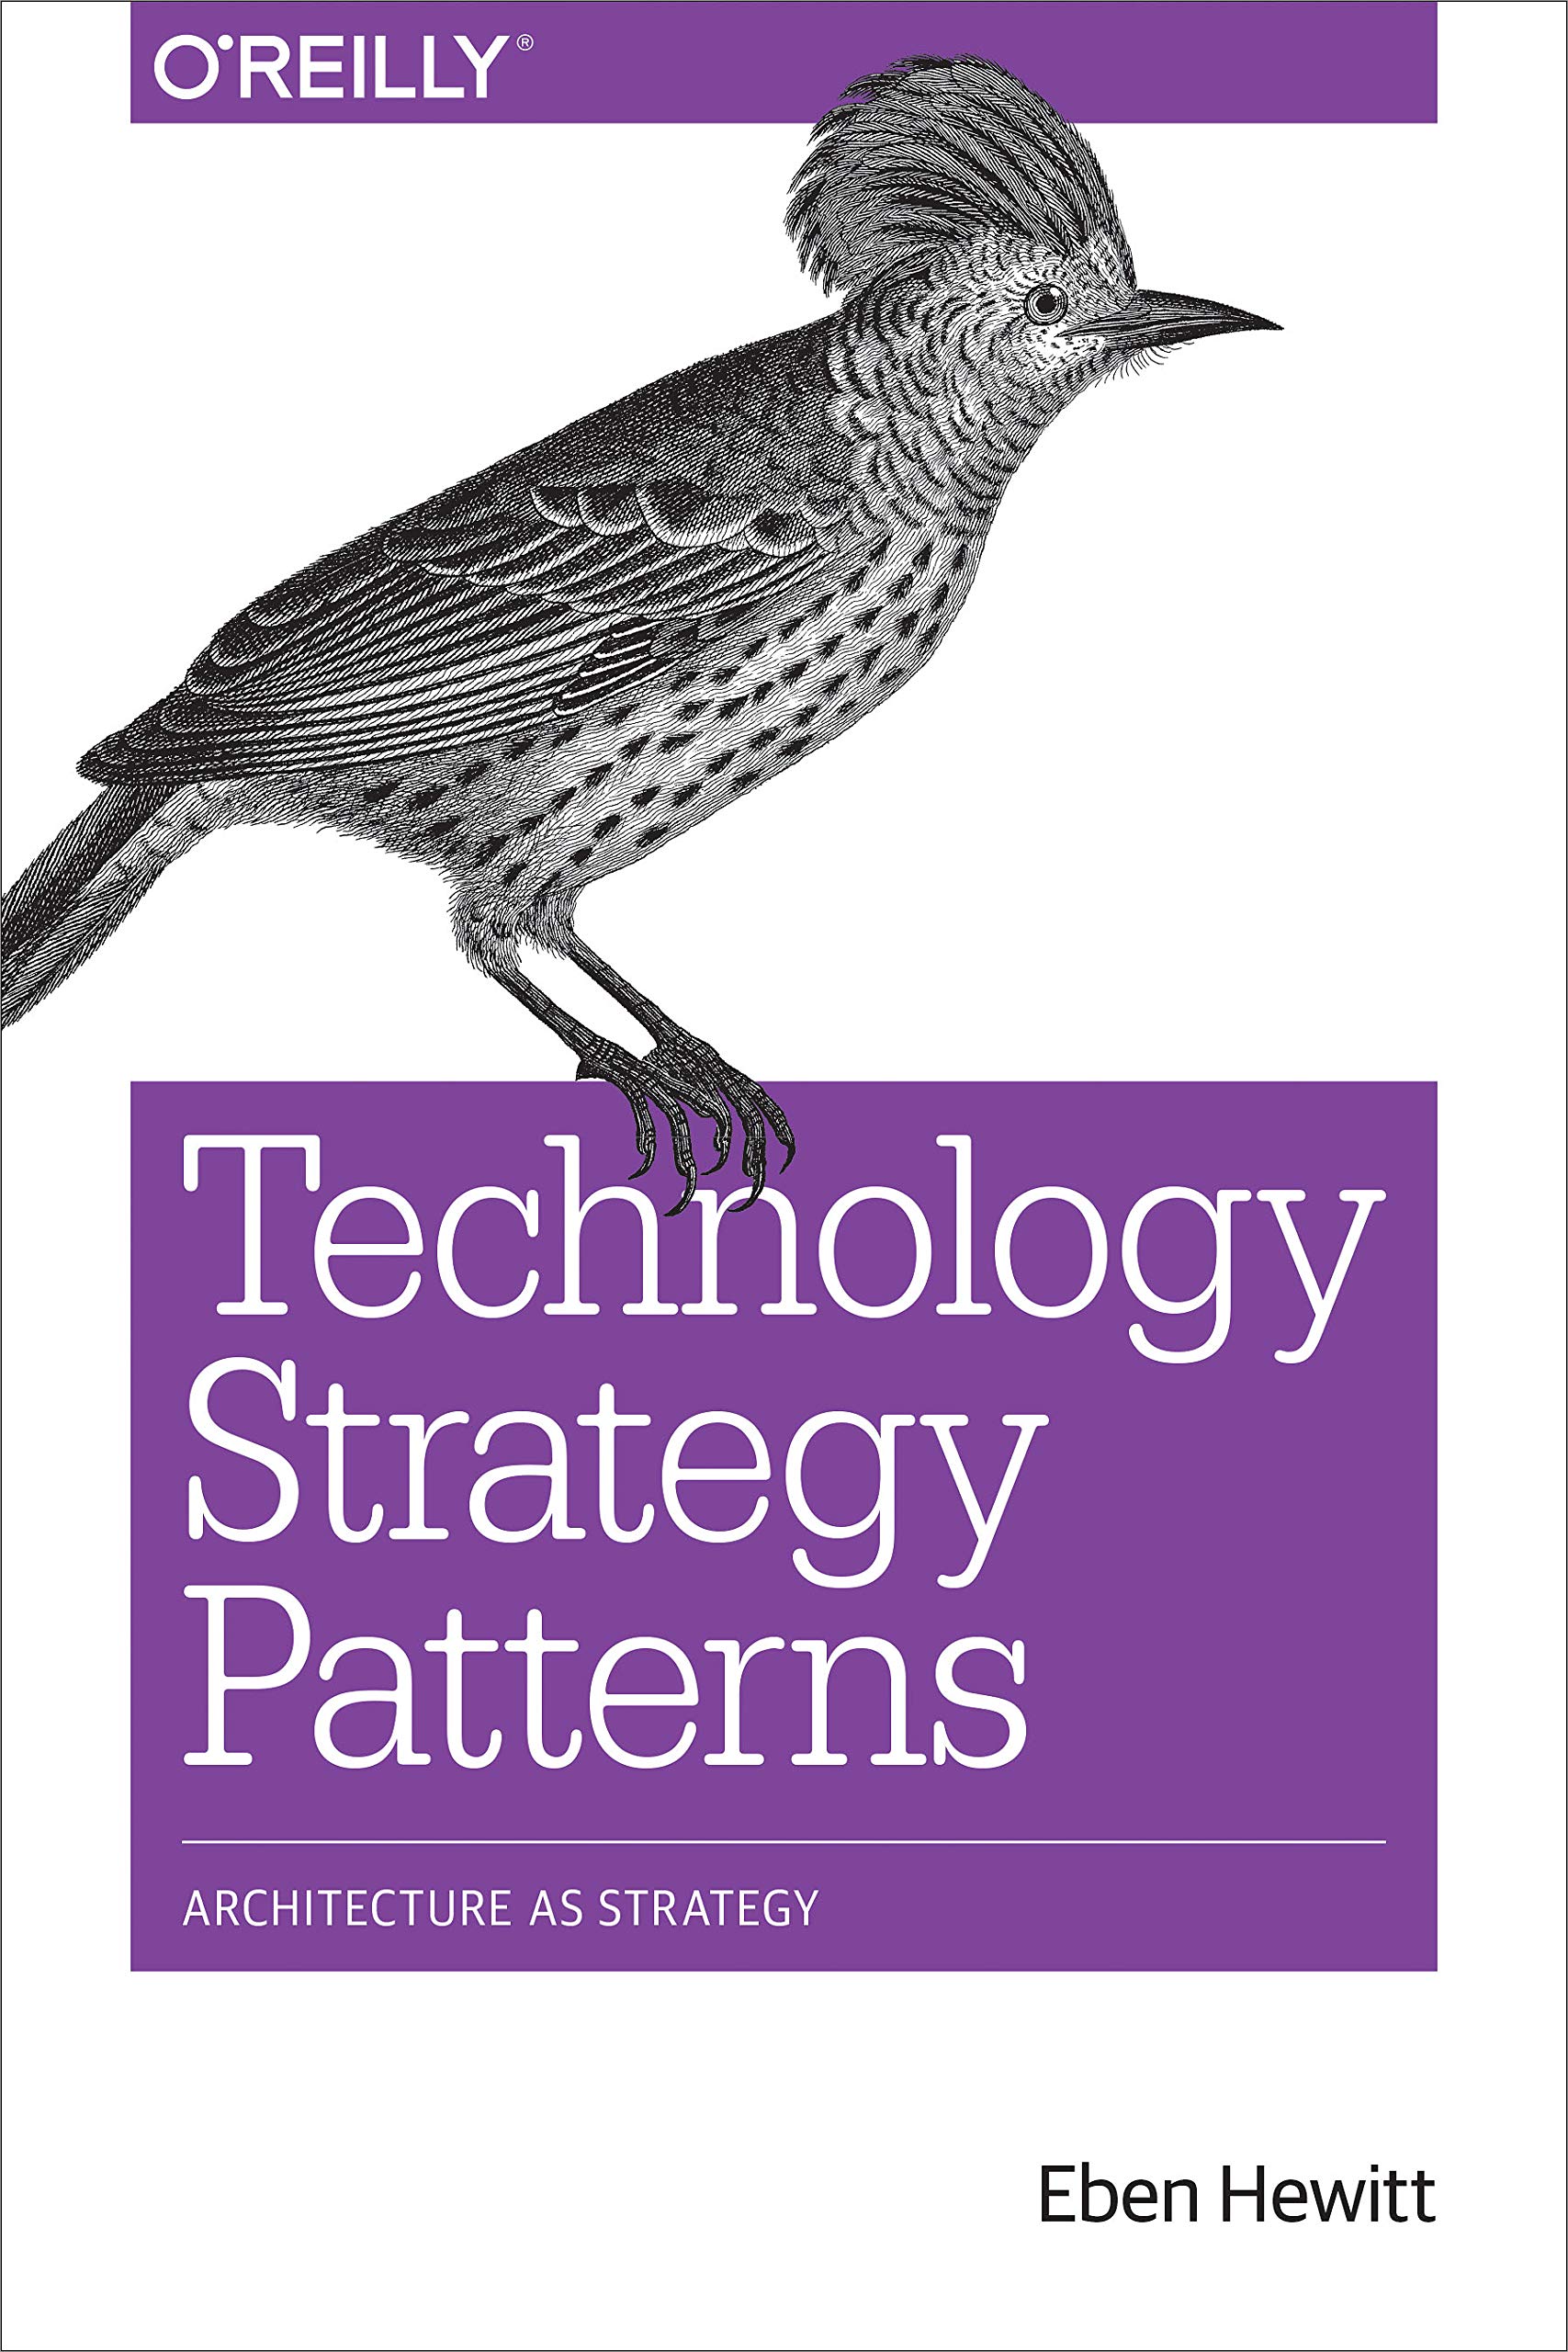 Eben Hewitt: Technology Strategy Patterns (2018, O'Reilly Media, Incorporated)